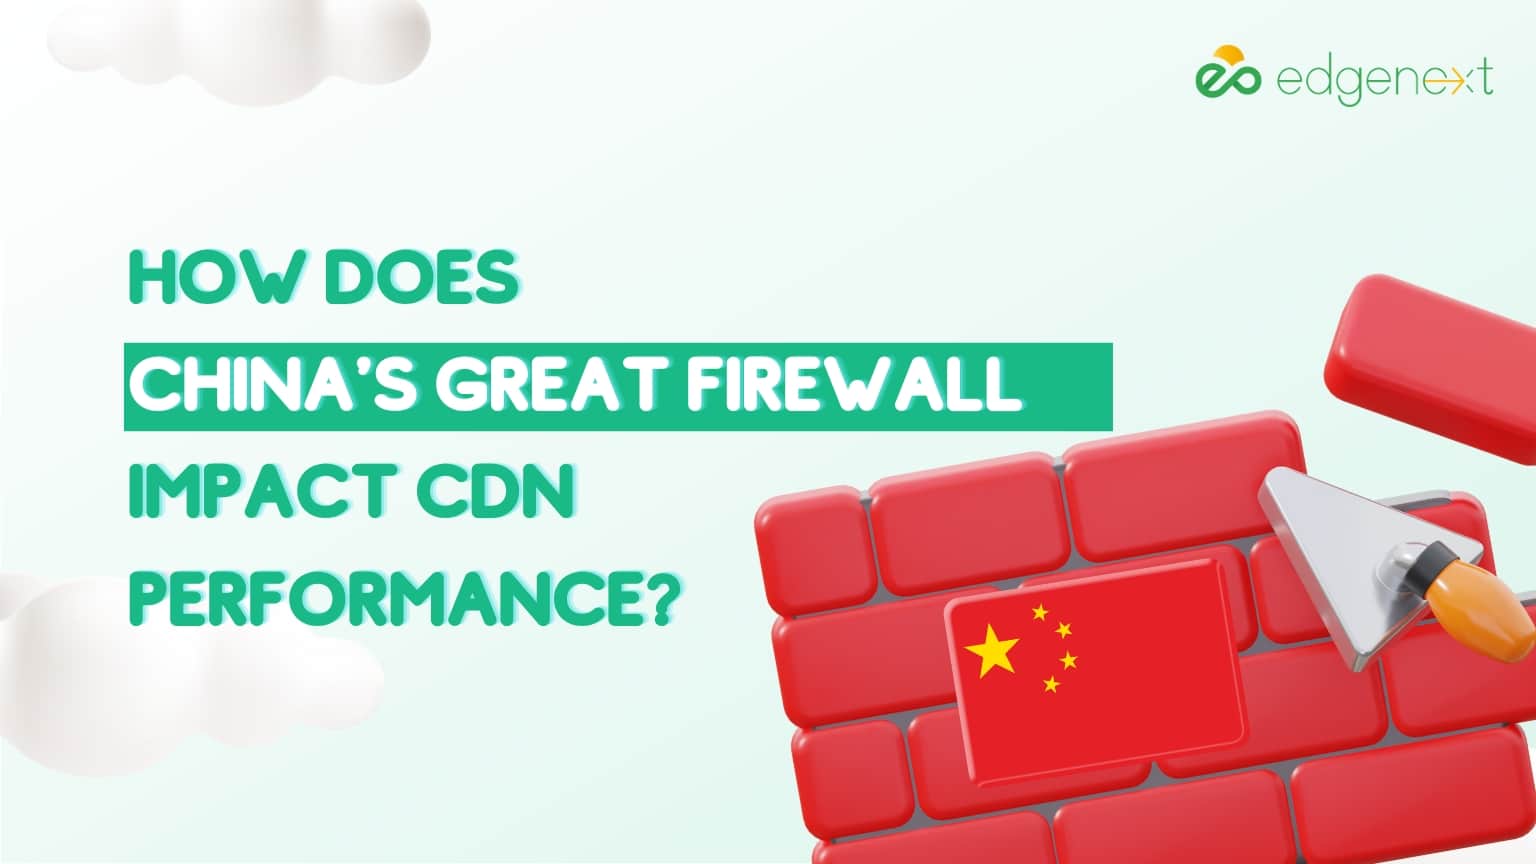 How Does China’s Great Firewall Impact CDN Performance?